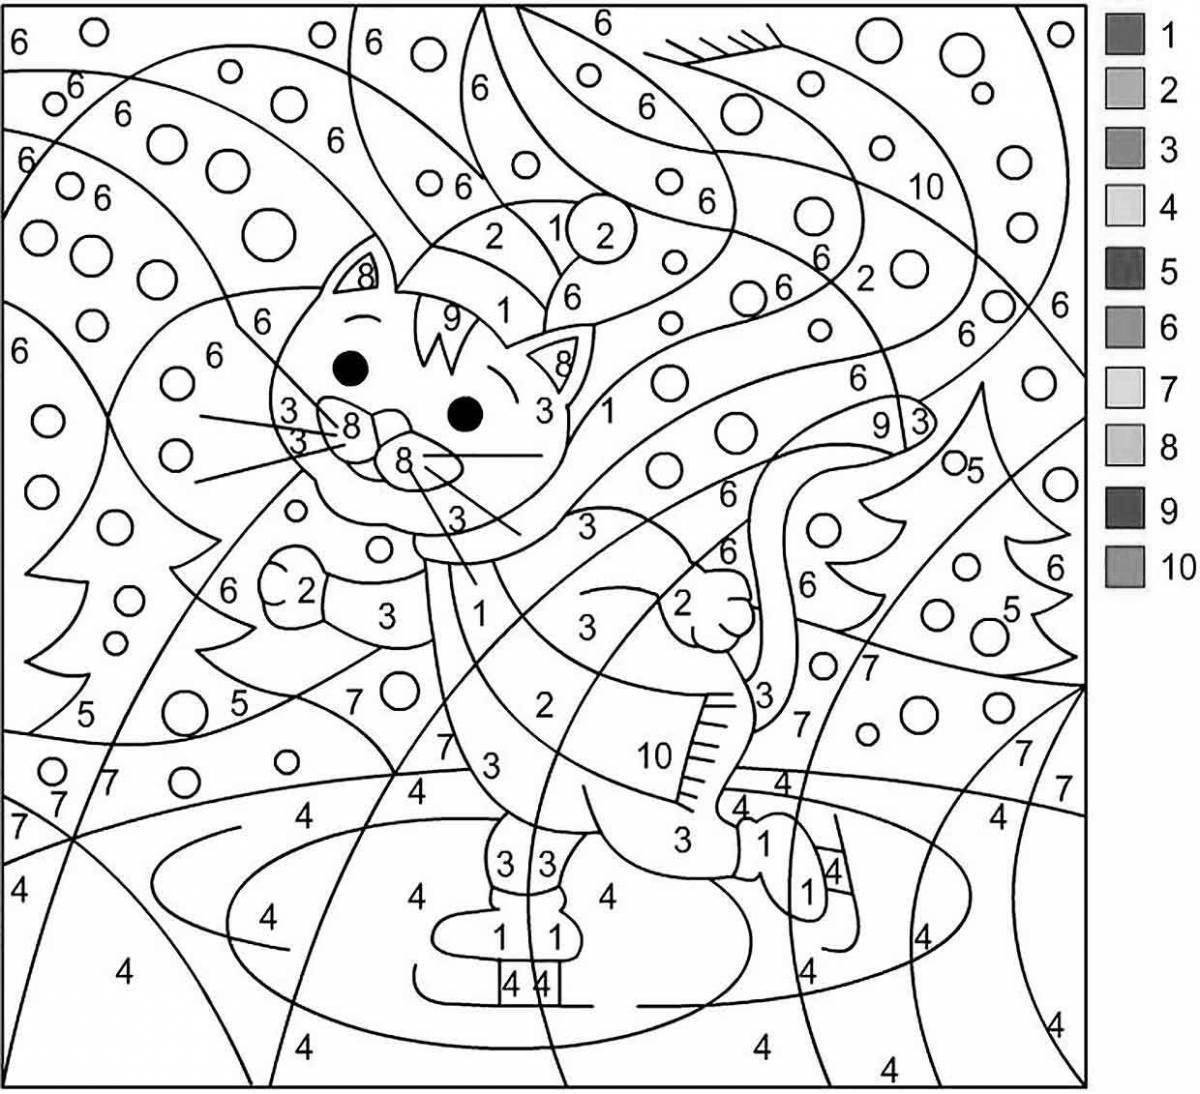 Creative computer coloring by numbers